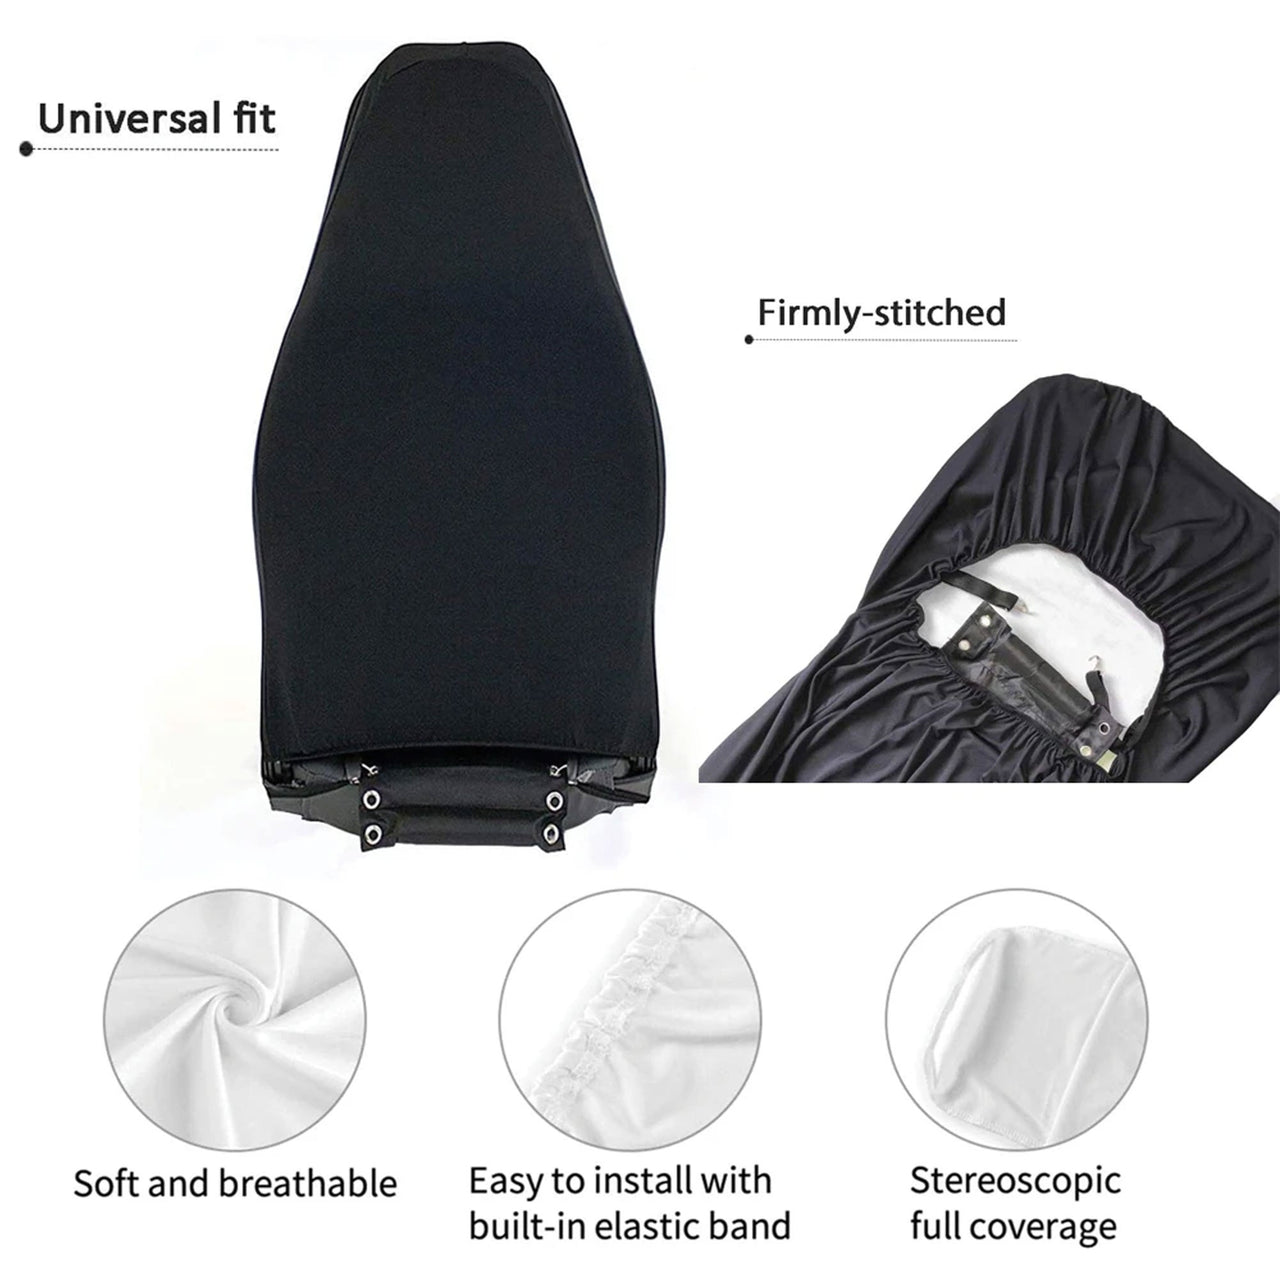 Custom Car Seat Cover Piano Music Seat Covers for Cars